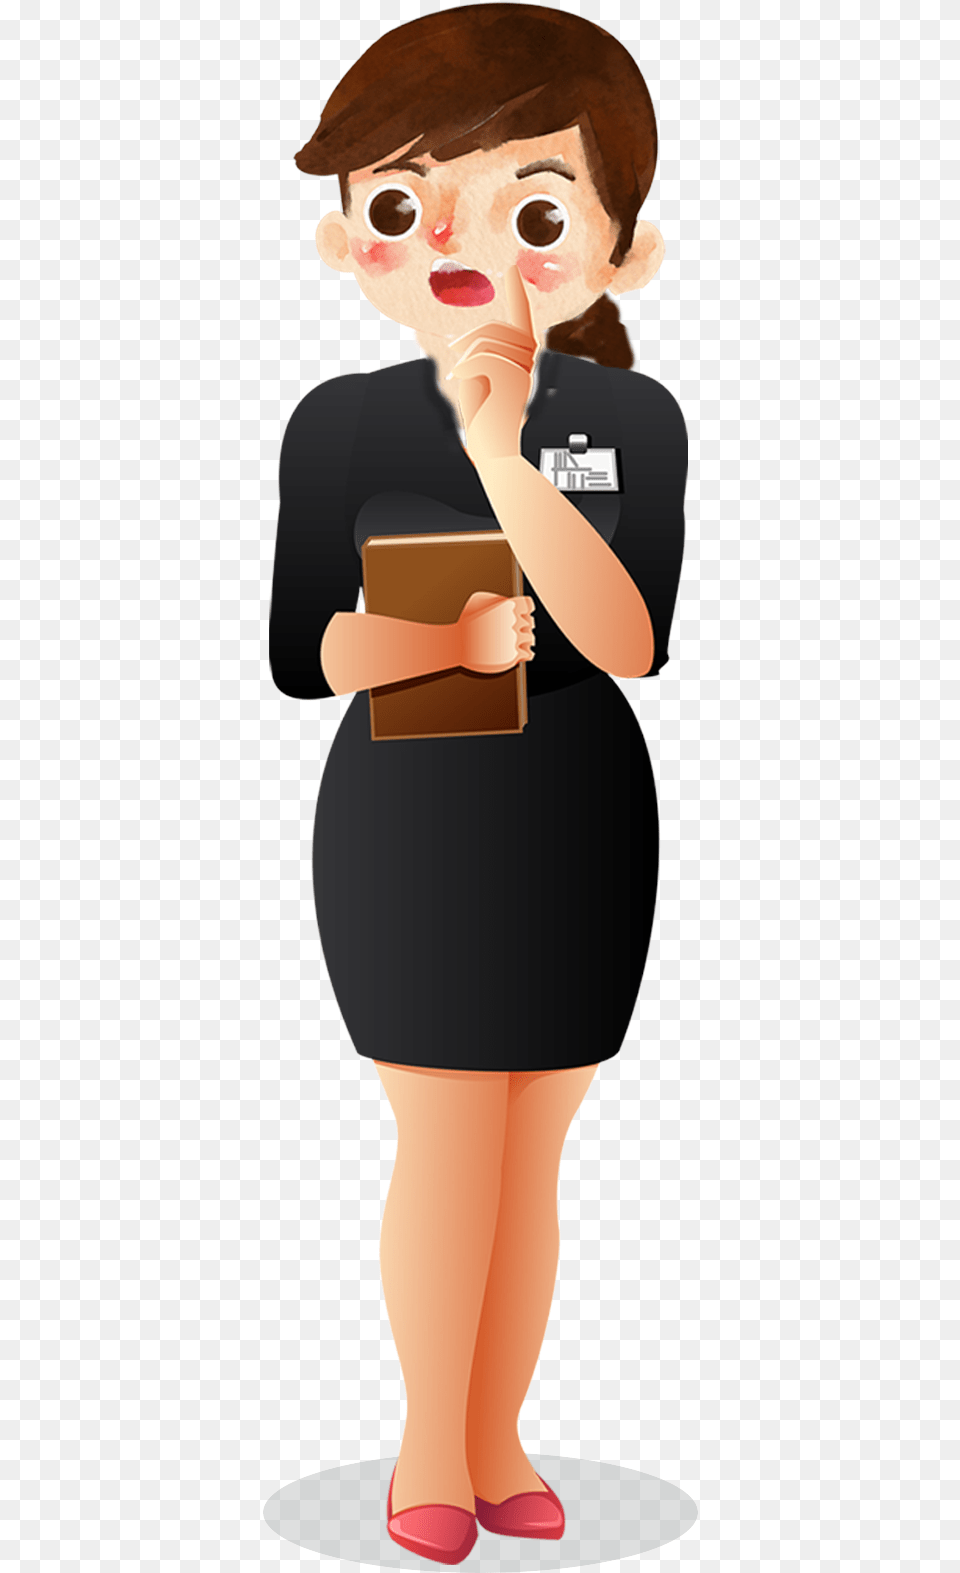 Cartoon Female White Collar Insurance Salesman Illustration, Baby, Person, Face, Head Png